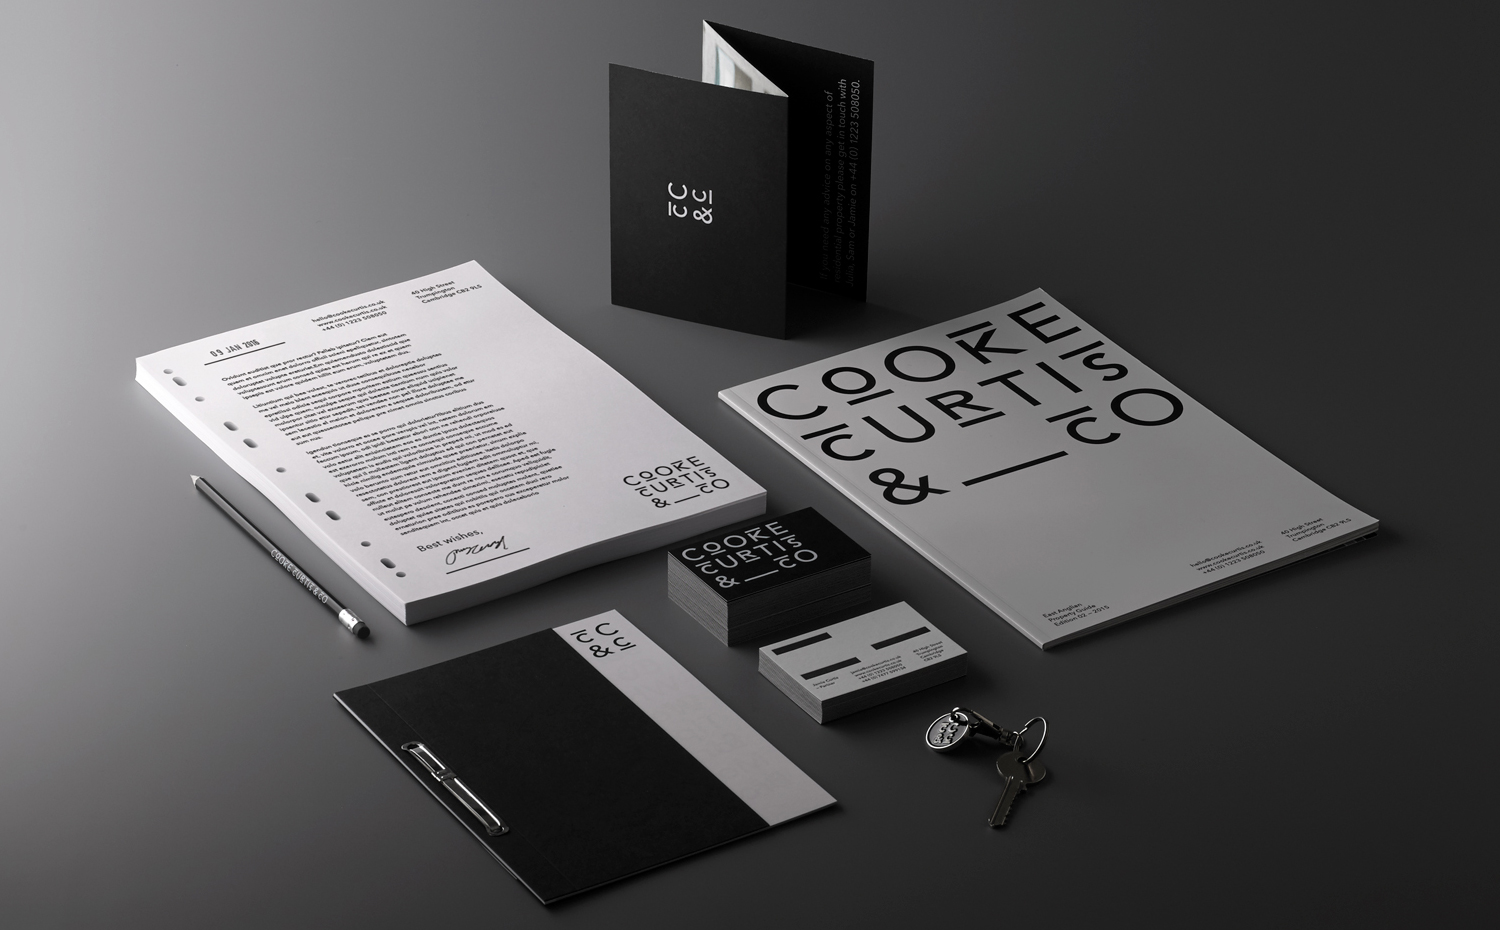 Brand identity, print and stationery for UK estate agent Cooke Curtis & Co. by graphic design studio The District, United Kingdom